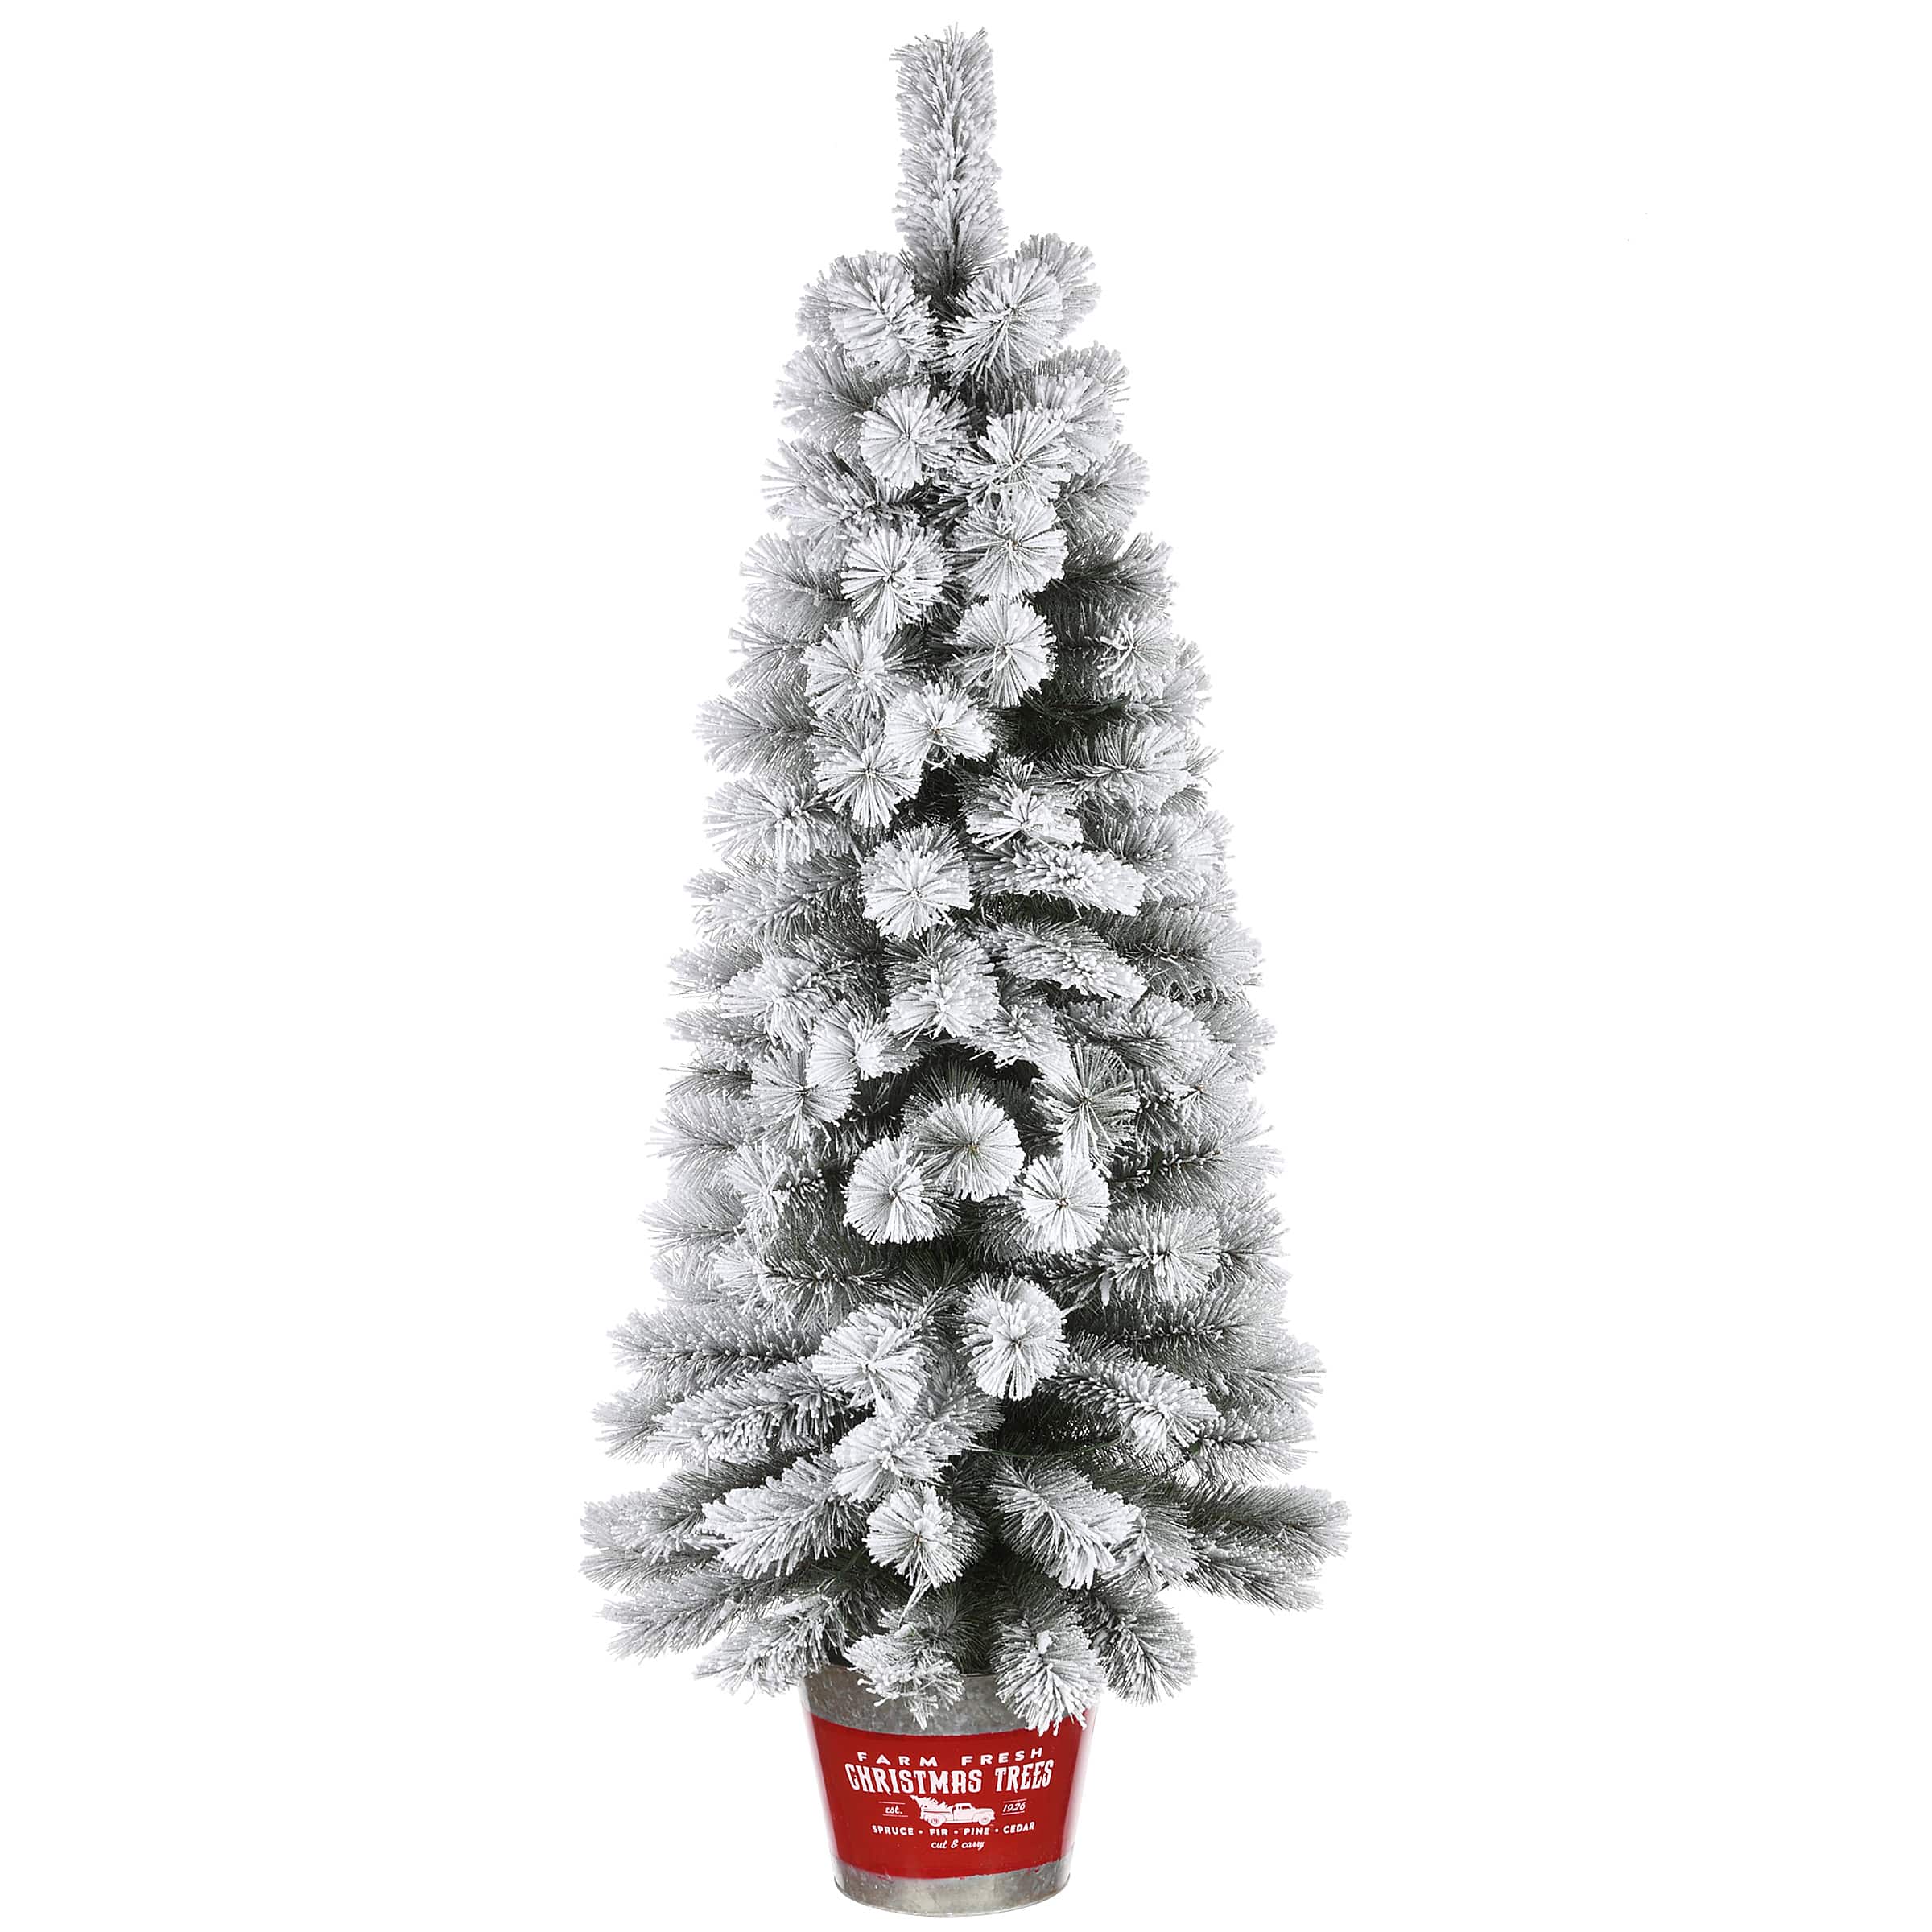 5ft. Snowy Pogue Pine Entrance Artificial Christmas Tree in Red Base, Warm White LED Lights